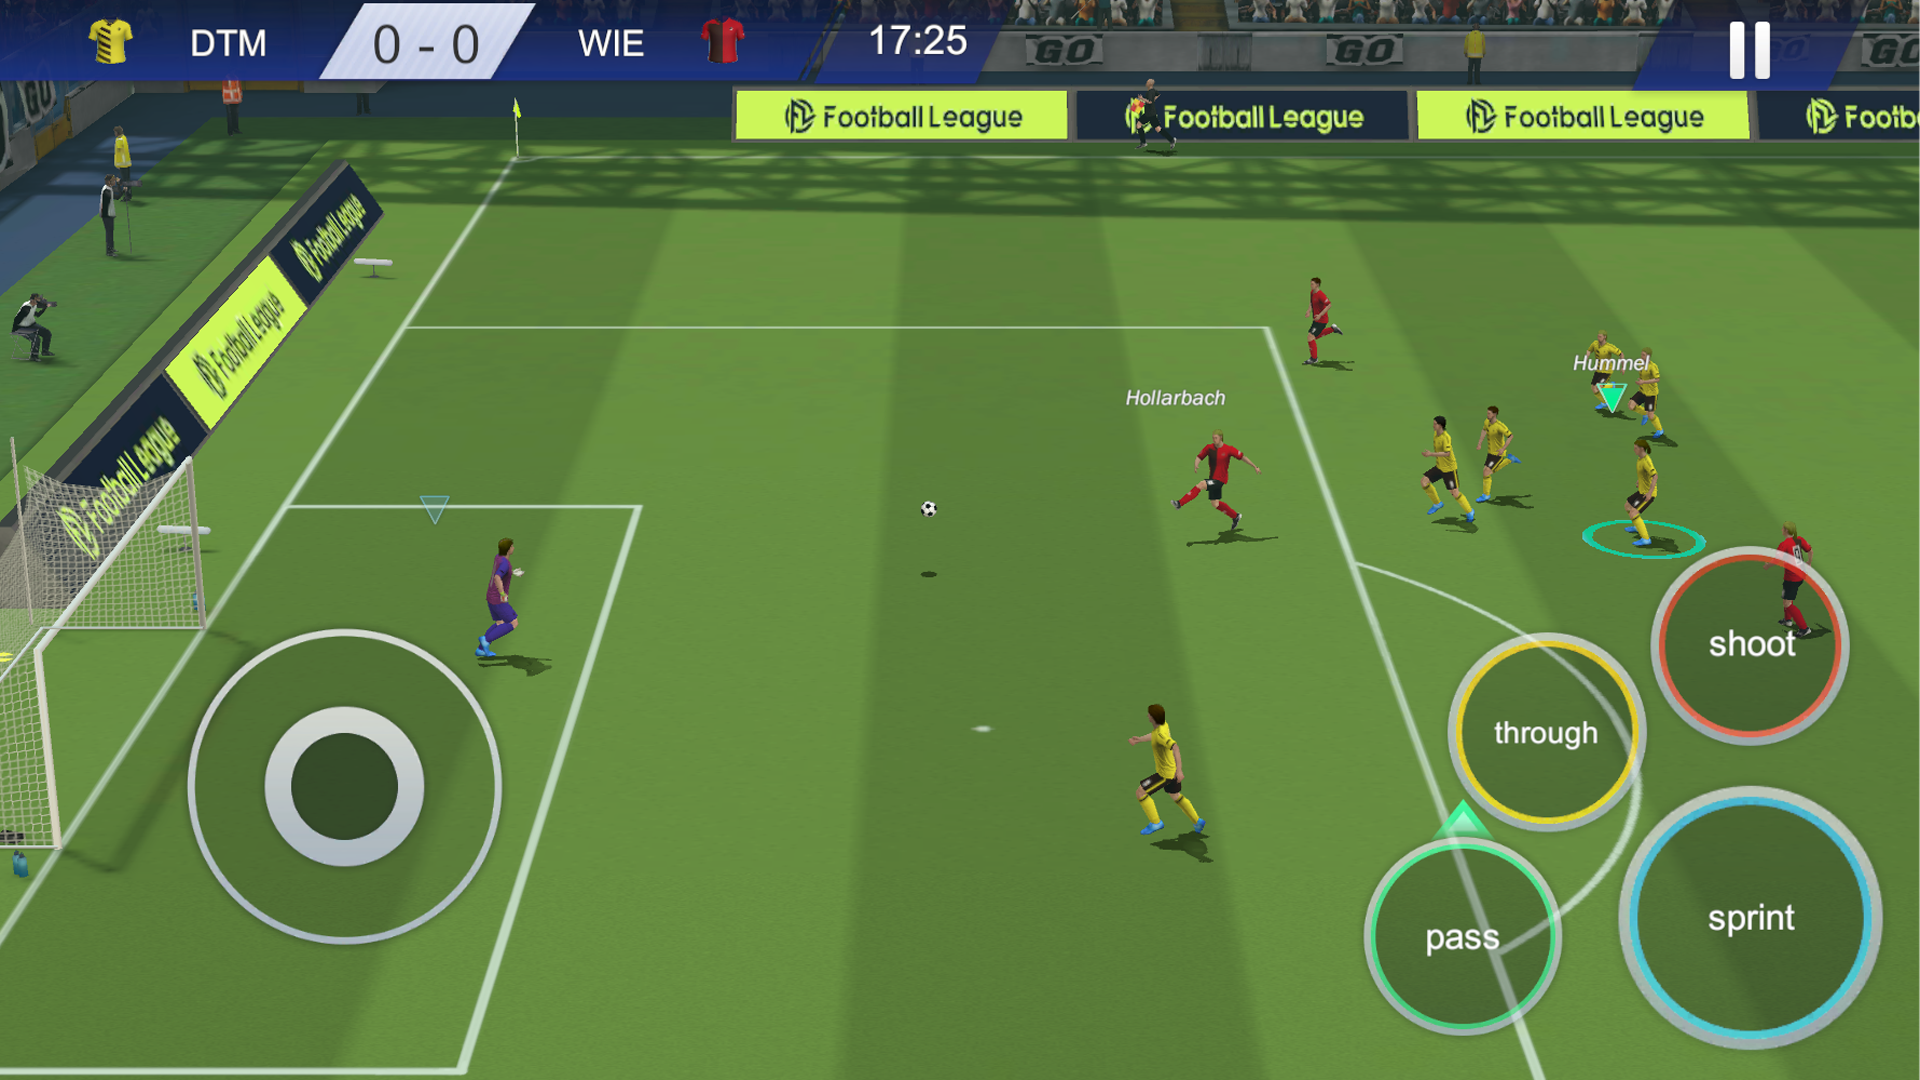 Download Dream League Soccer 2020 on PC with MEmu